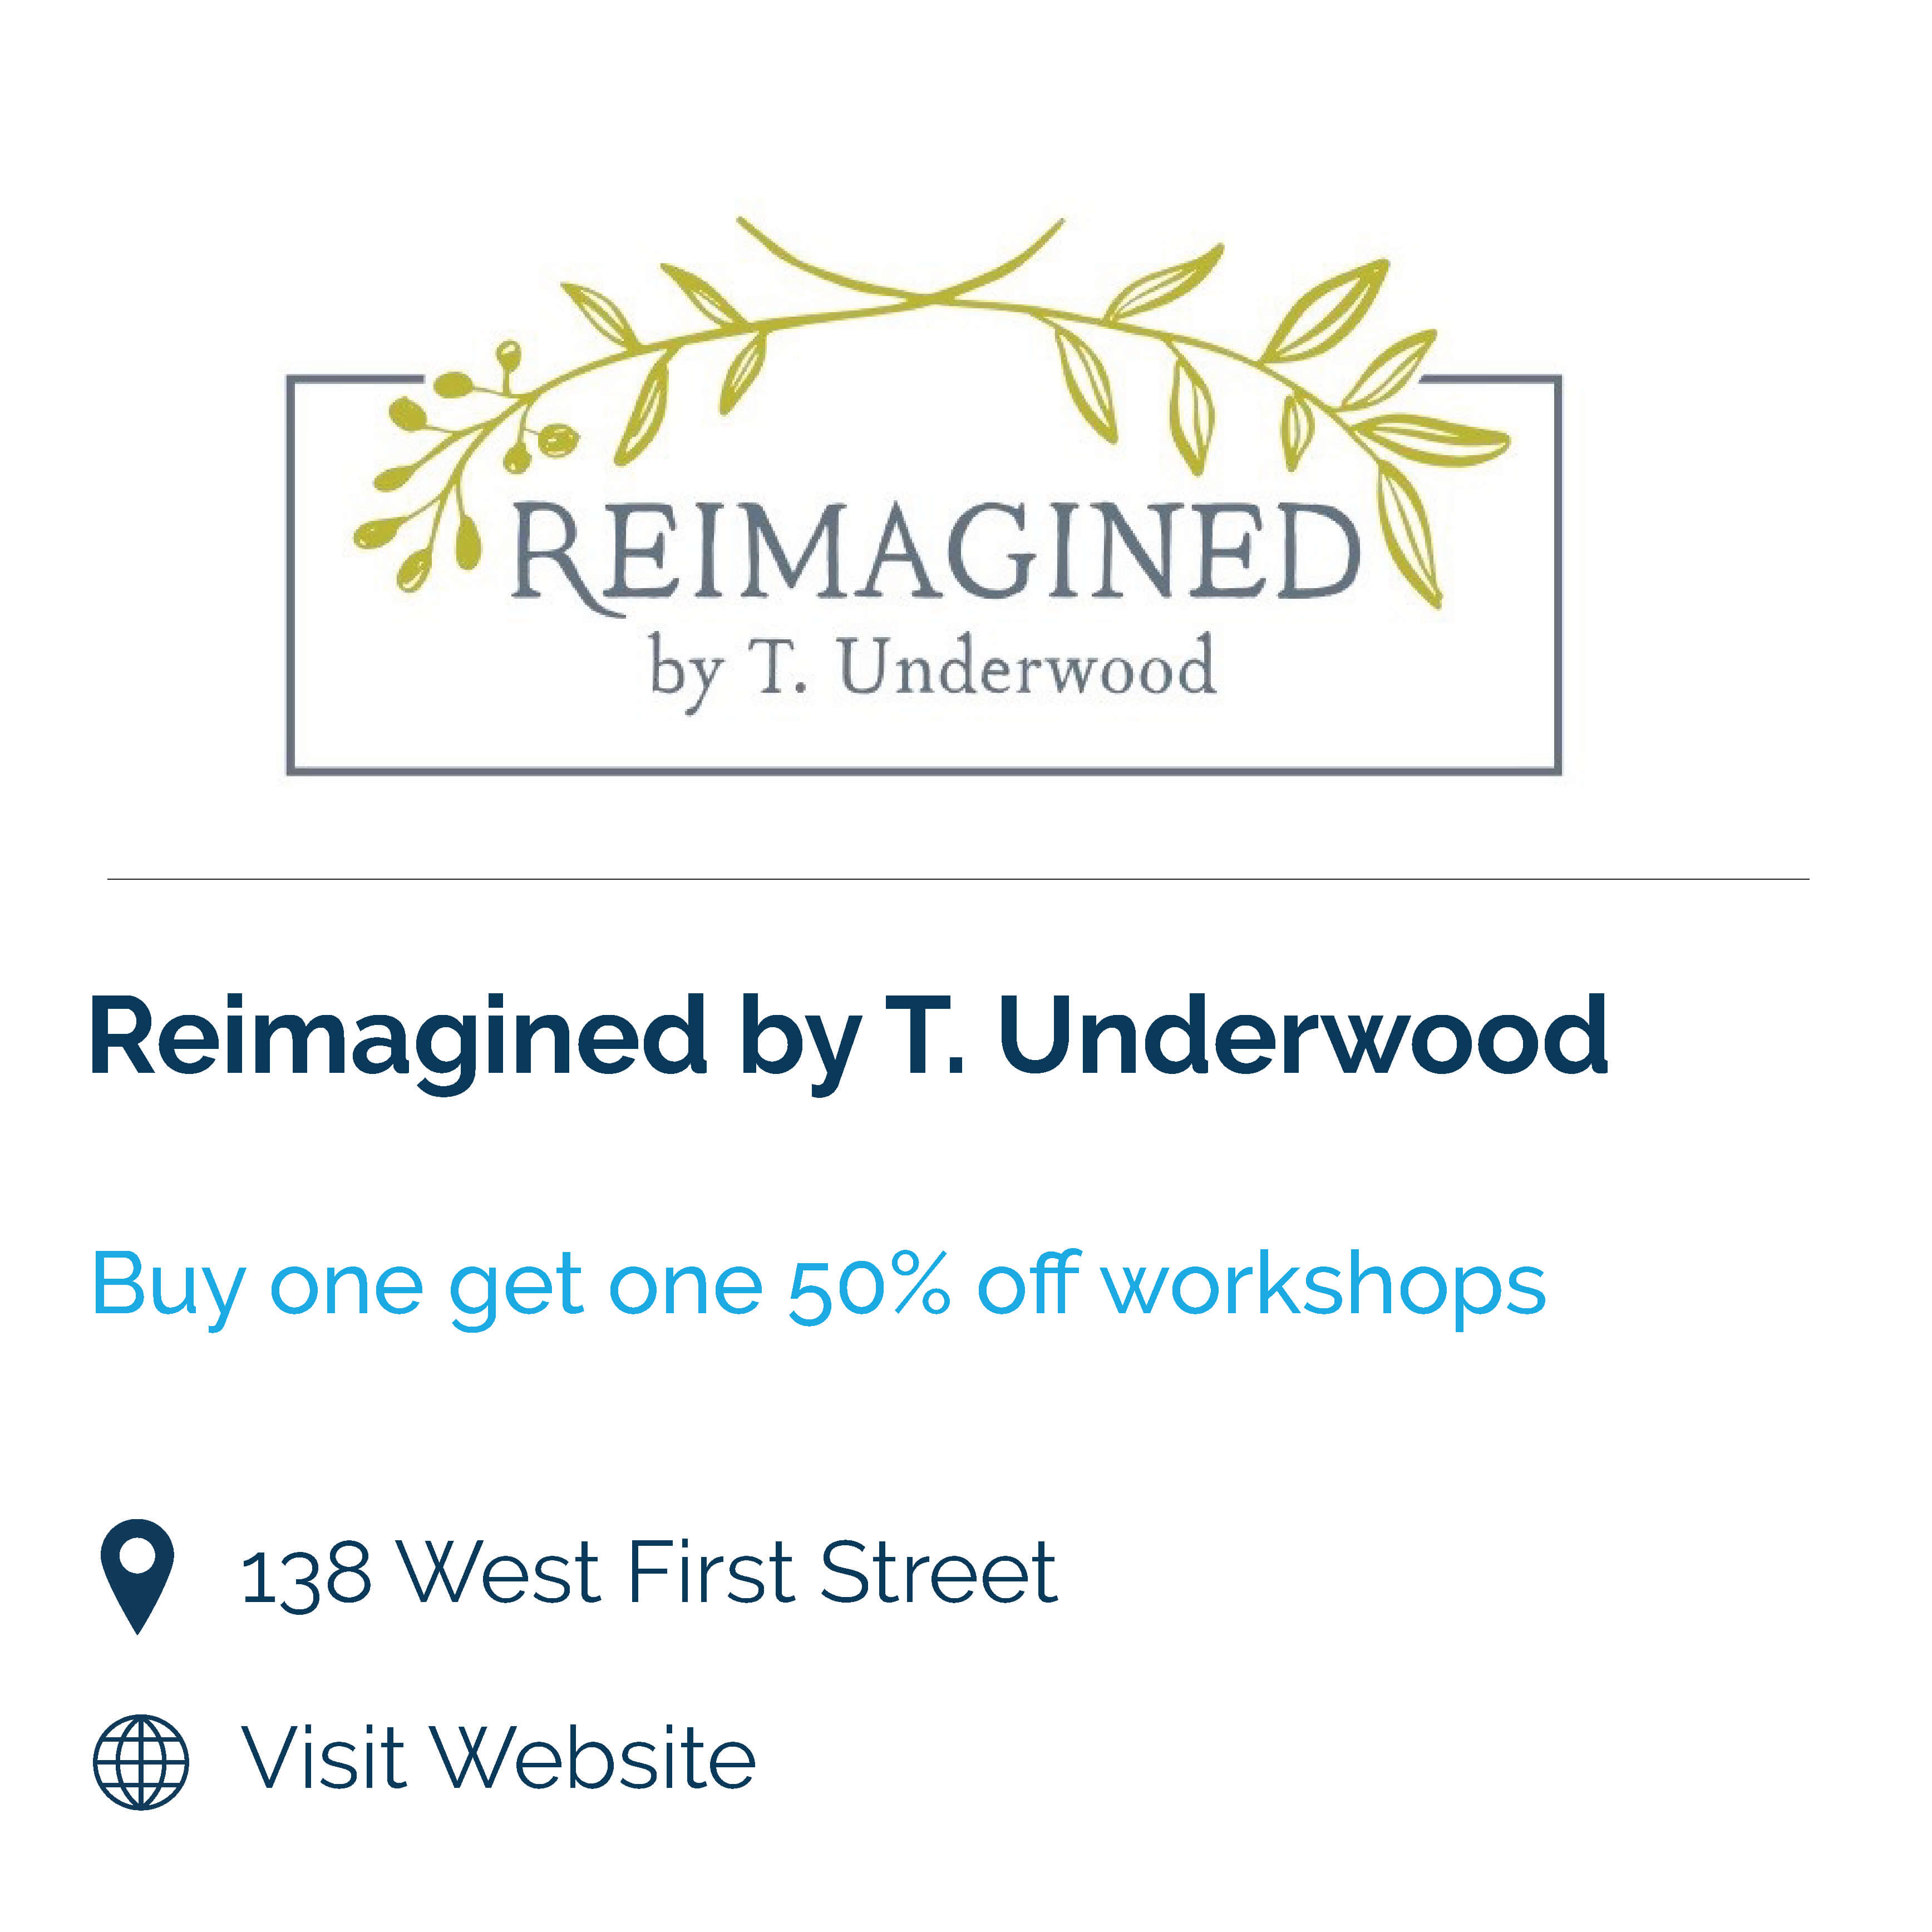 reimagined by t underwood. buy one get one 50% off workshops. 138 west first street